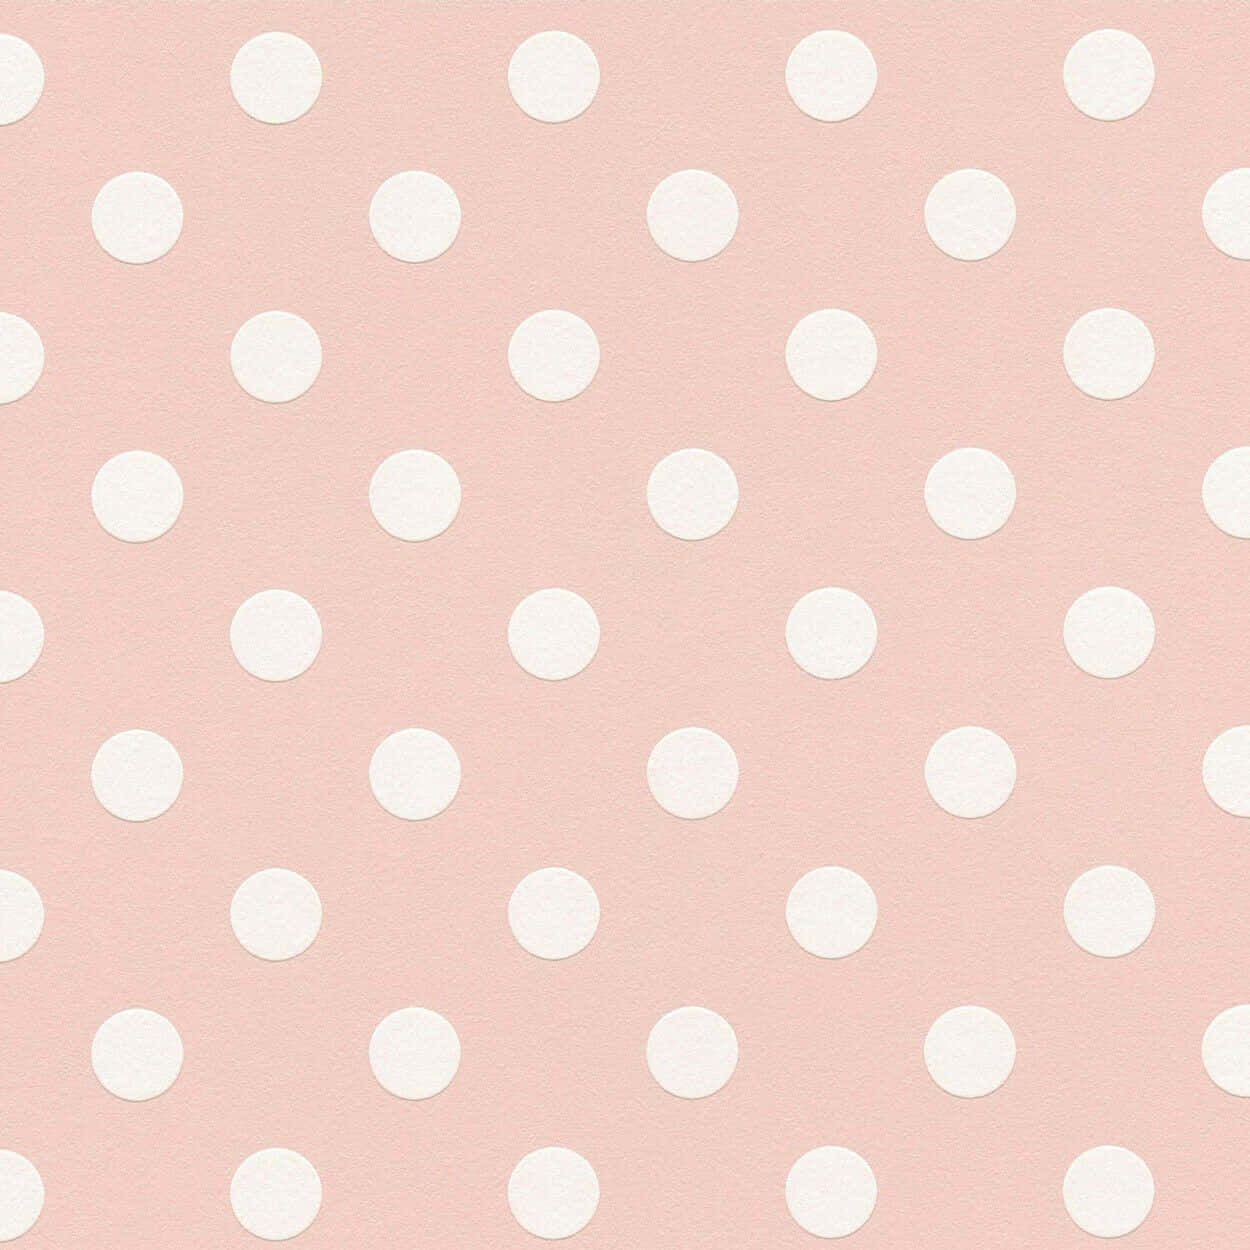 Sweet and Stylish - Playful and Fun Pink and White Polka Dot Wallpaper